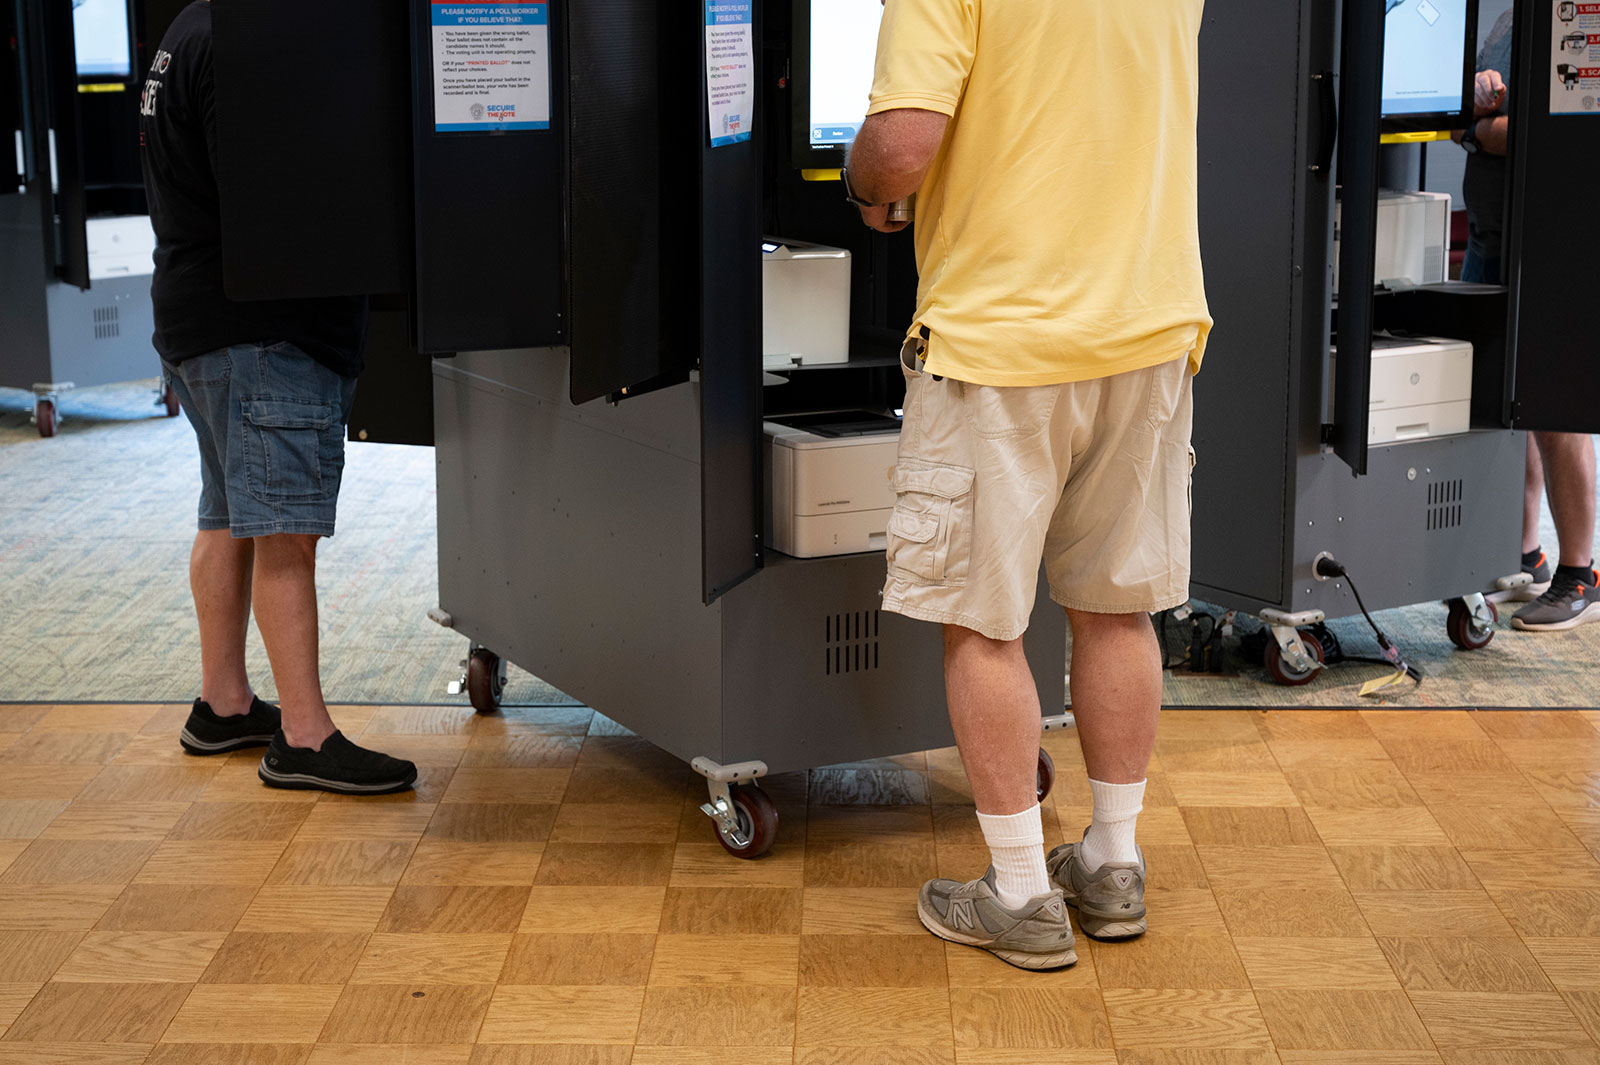 People vote early at the Tim. D. Lee Senior Center in East Cobb County in Georgia on May 2. 